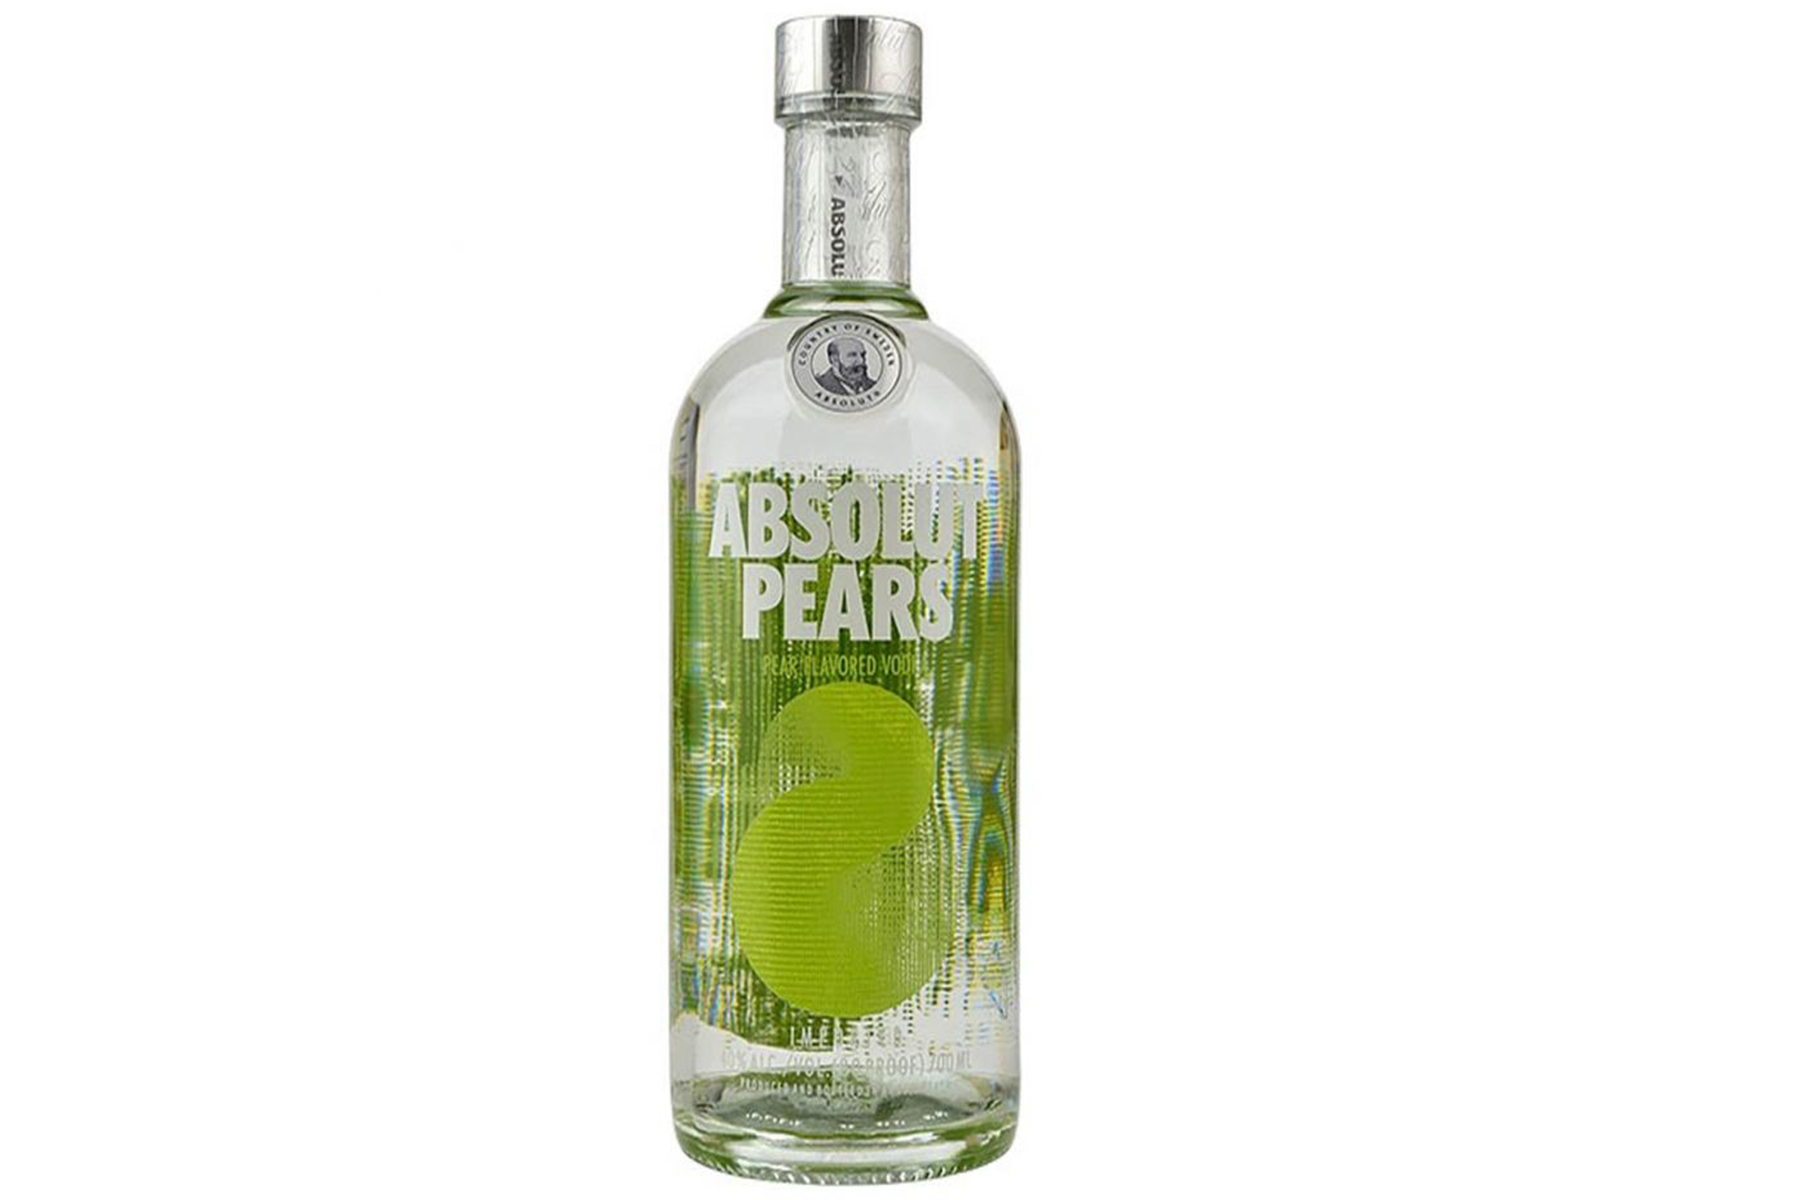 Mirage Park Resort Absolut Pears 70 cl